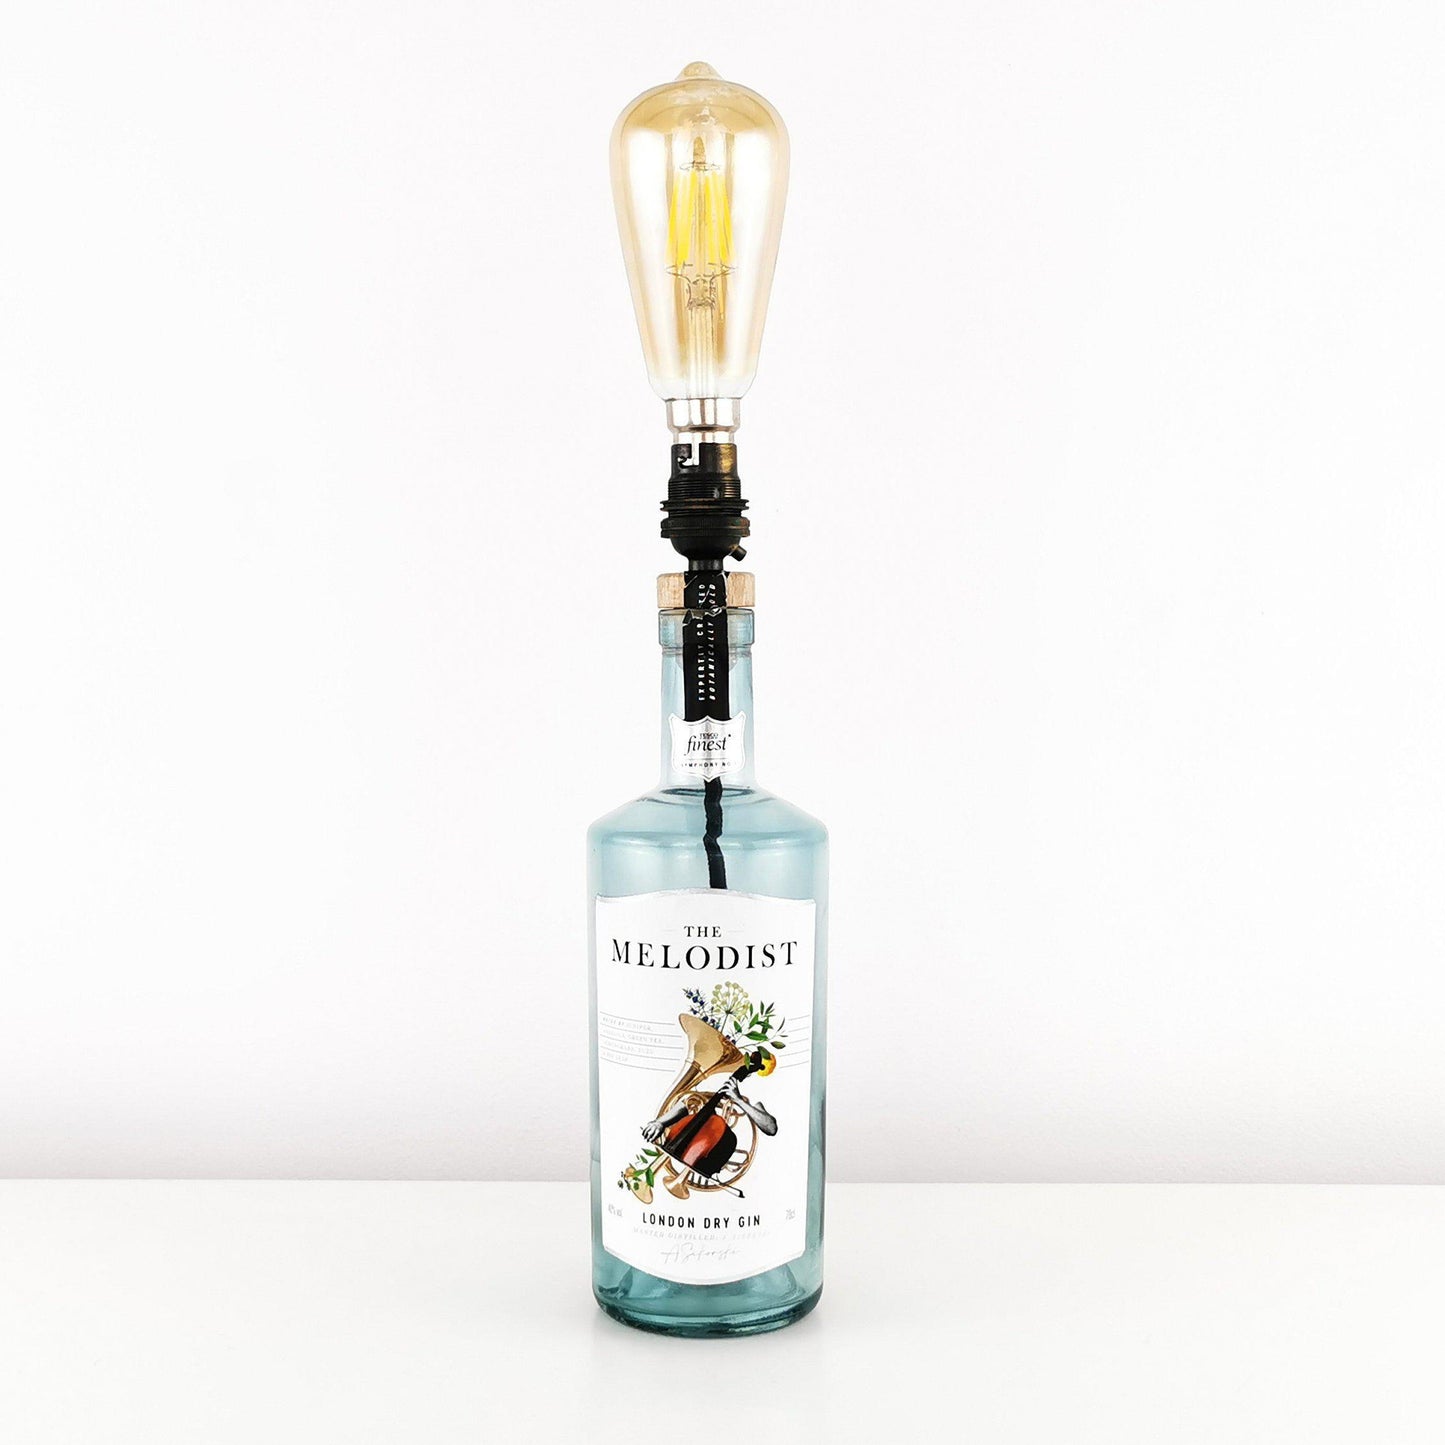 The Melodist London Dry Gin Bottle Table Lamp Gin Bottle Table Lamps